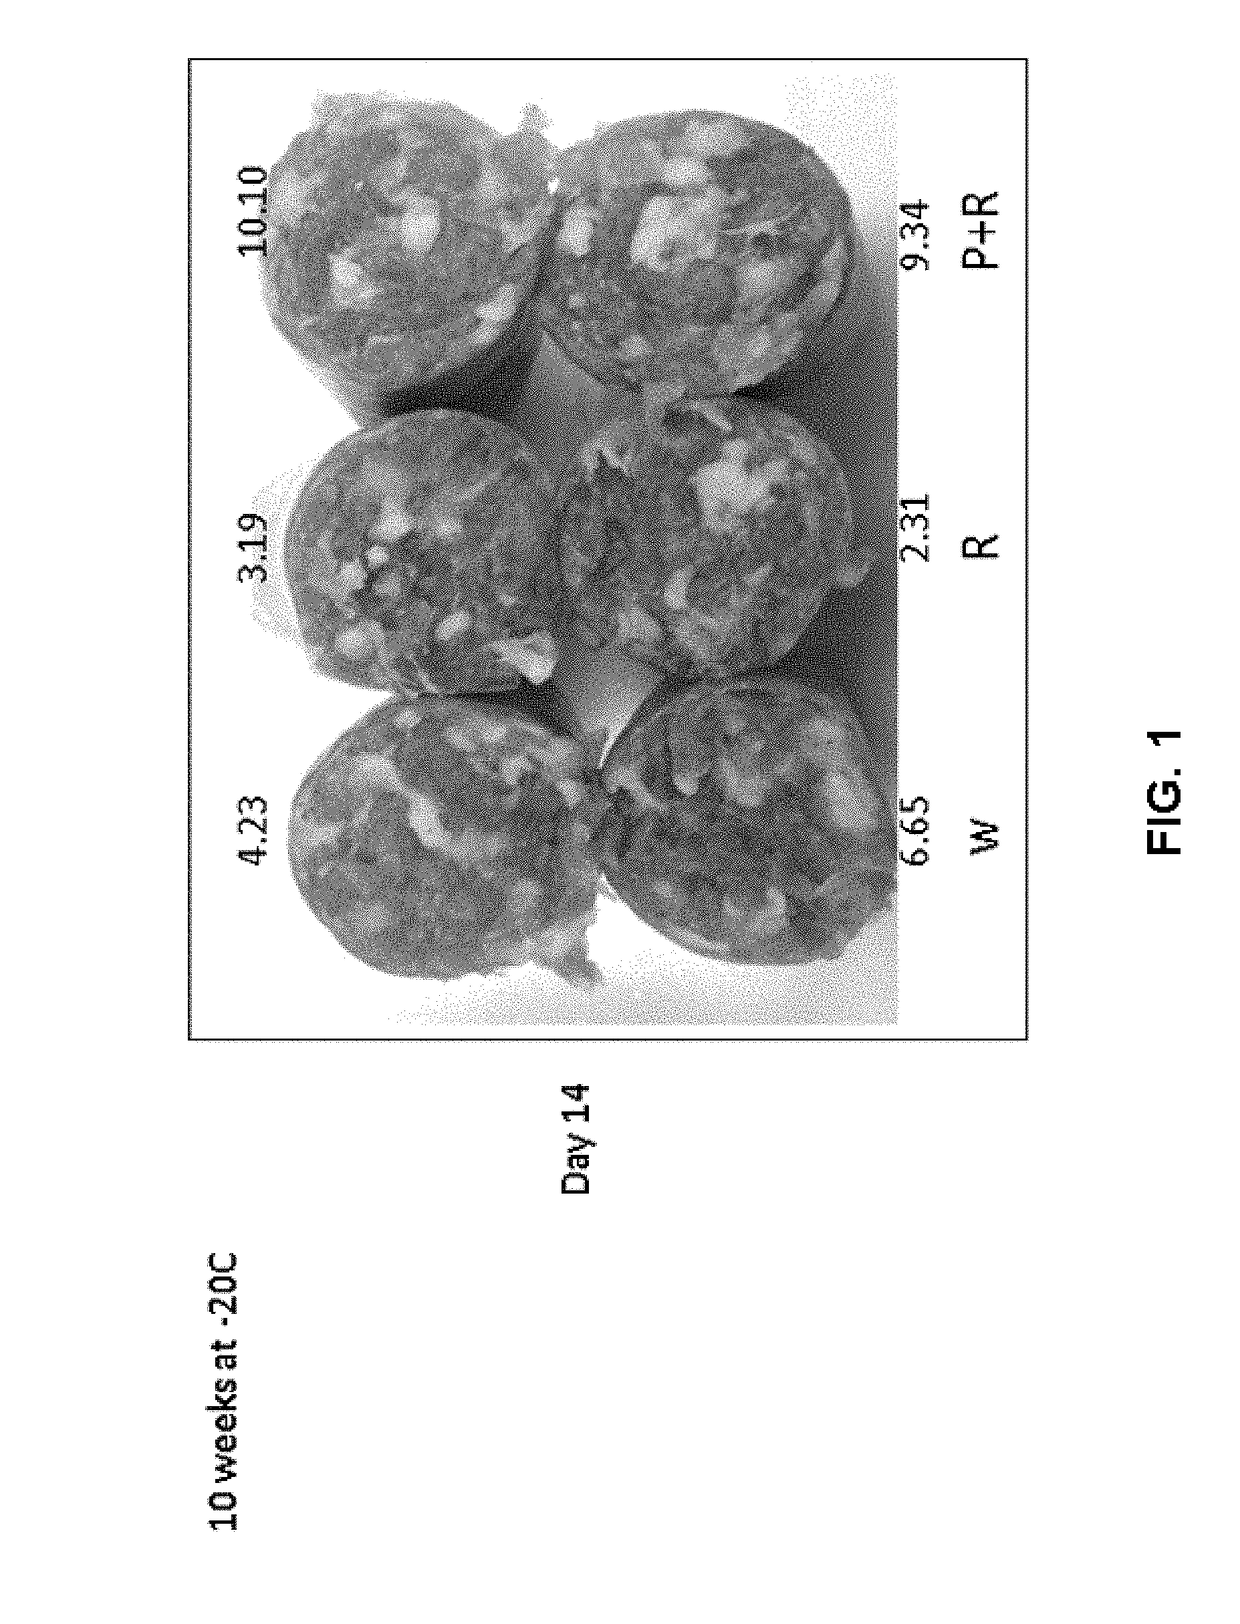 Rosemary/phospholipase compositions and methods of preserving muscle tissue